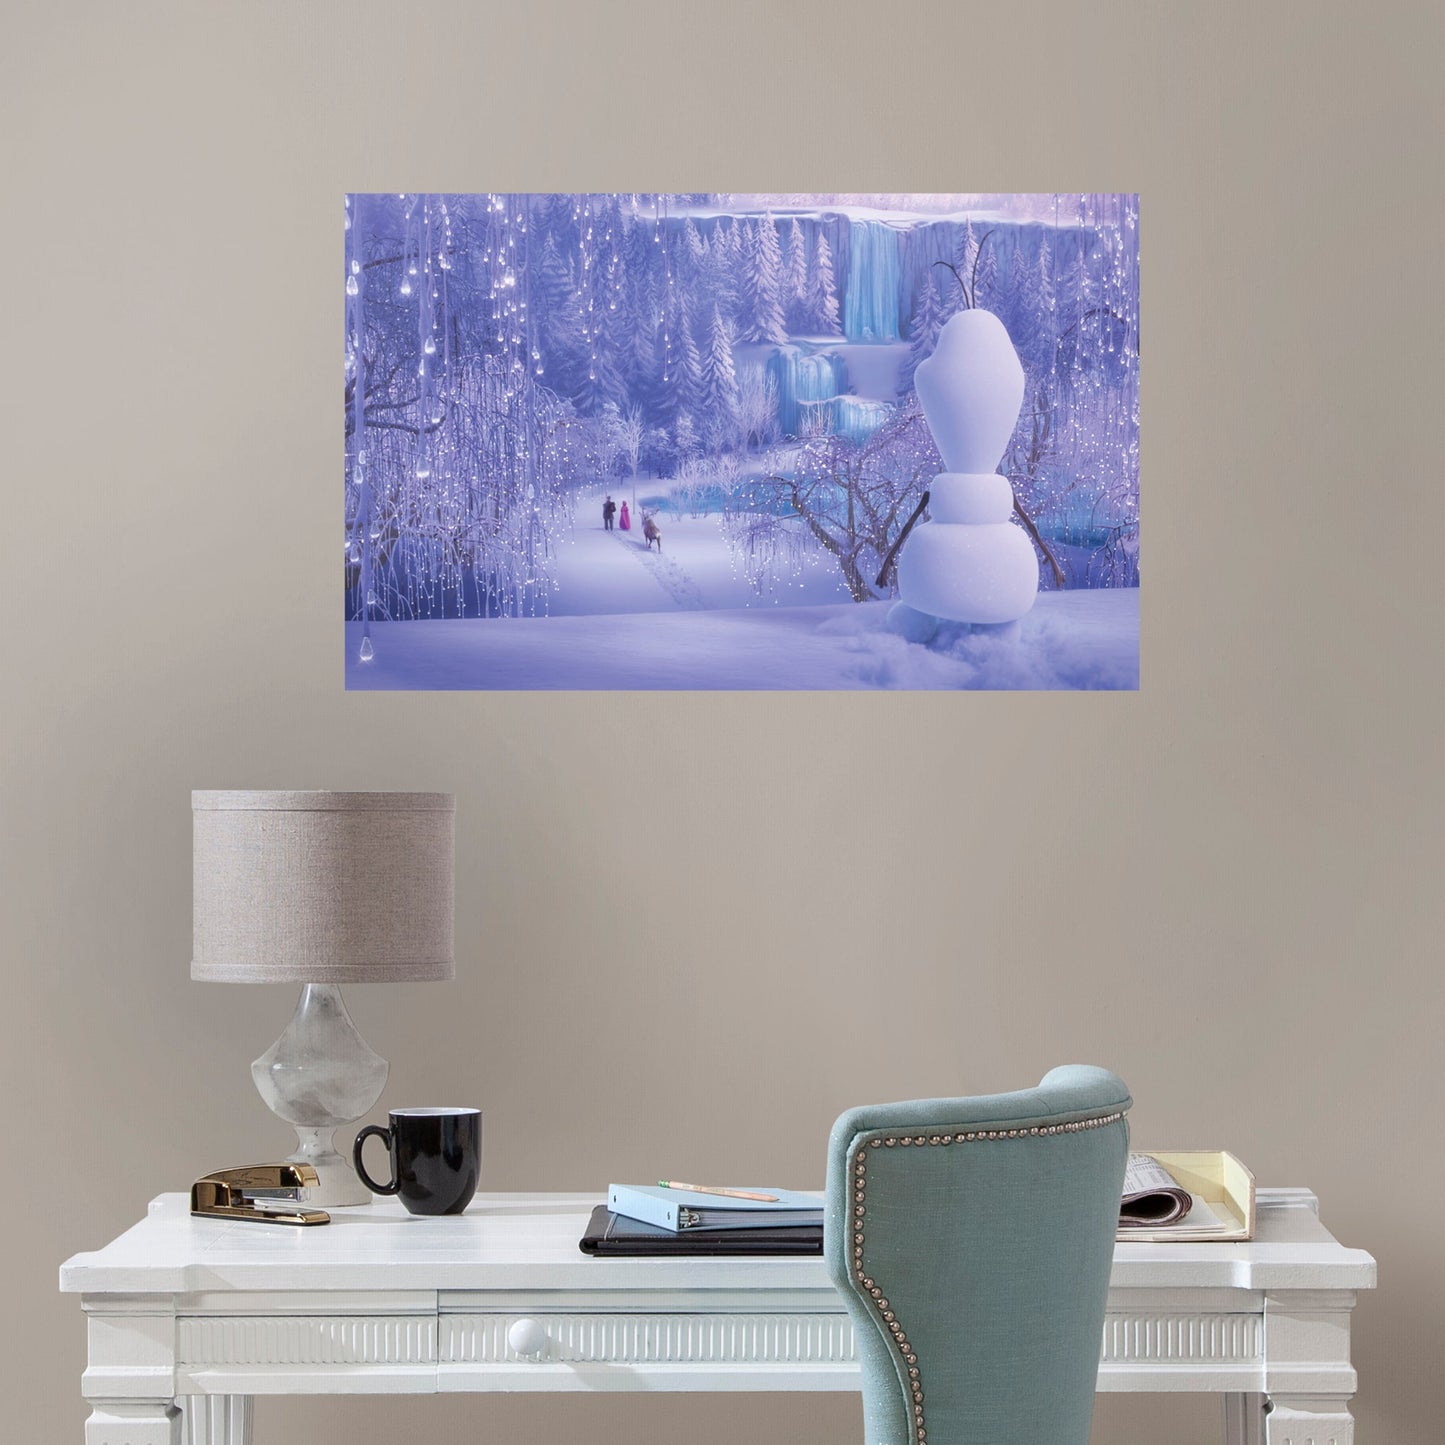 Frozen: Once Upon A Snowman: Olaf Winter Mural        - Officially Licensed Disney Removable Wall   Adhesive Decal